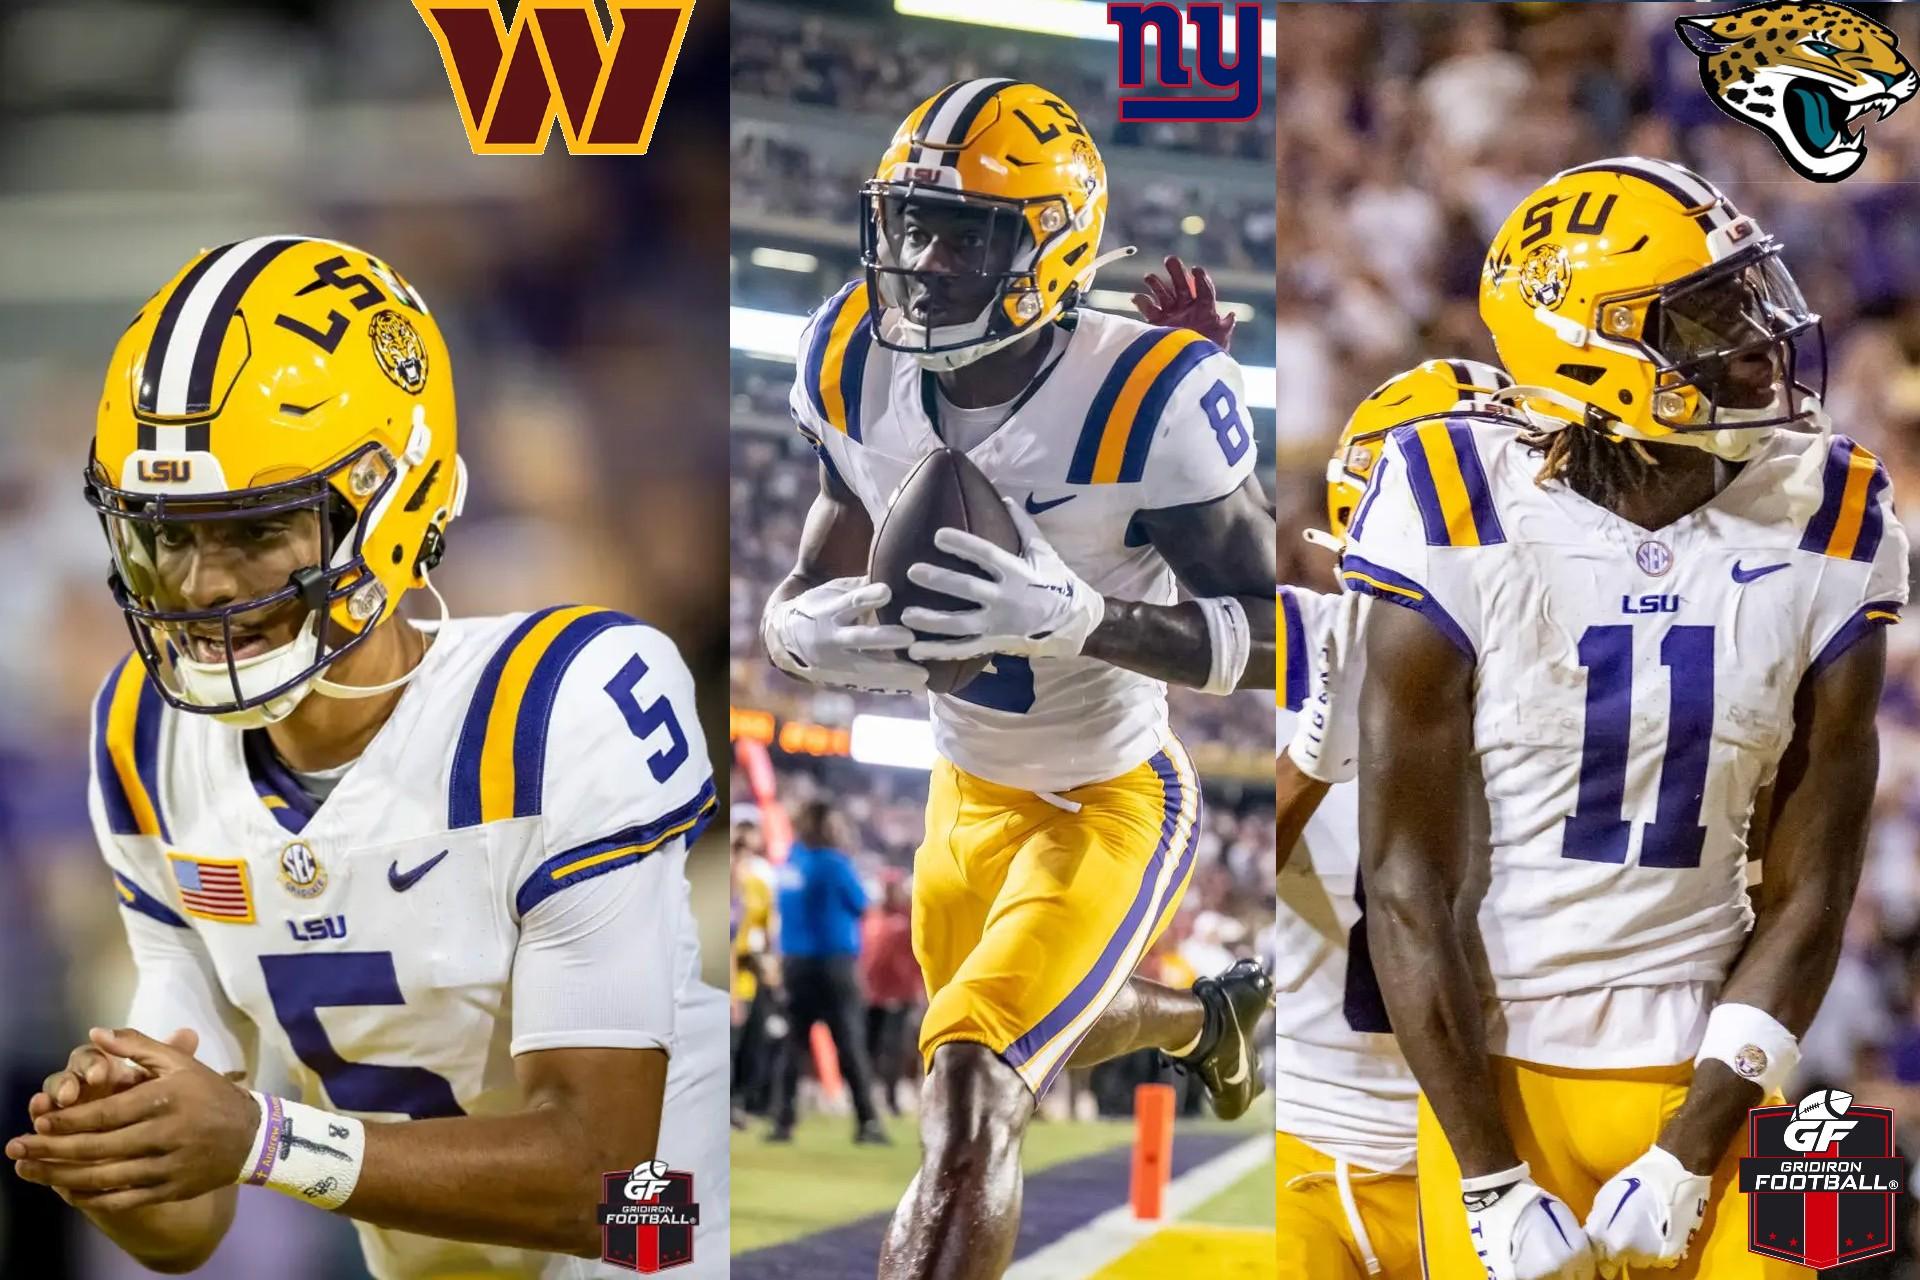 LSU’s Dynamic Offensive Trio Gets Drafted in First Round of NFL Draft